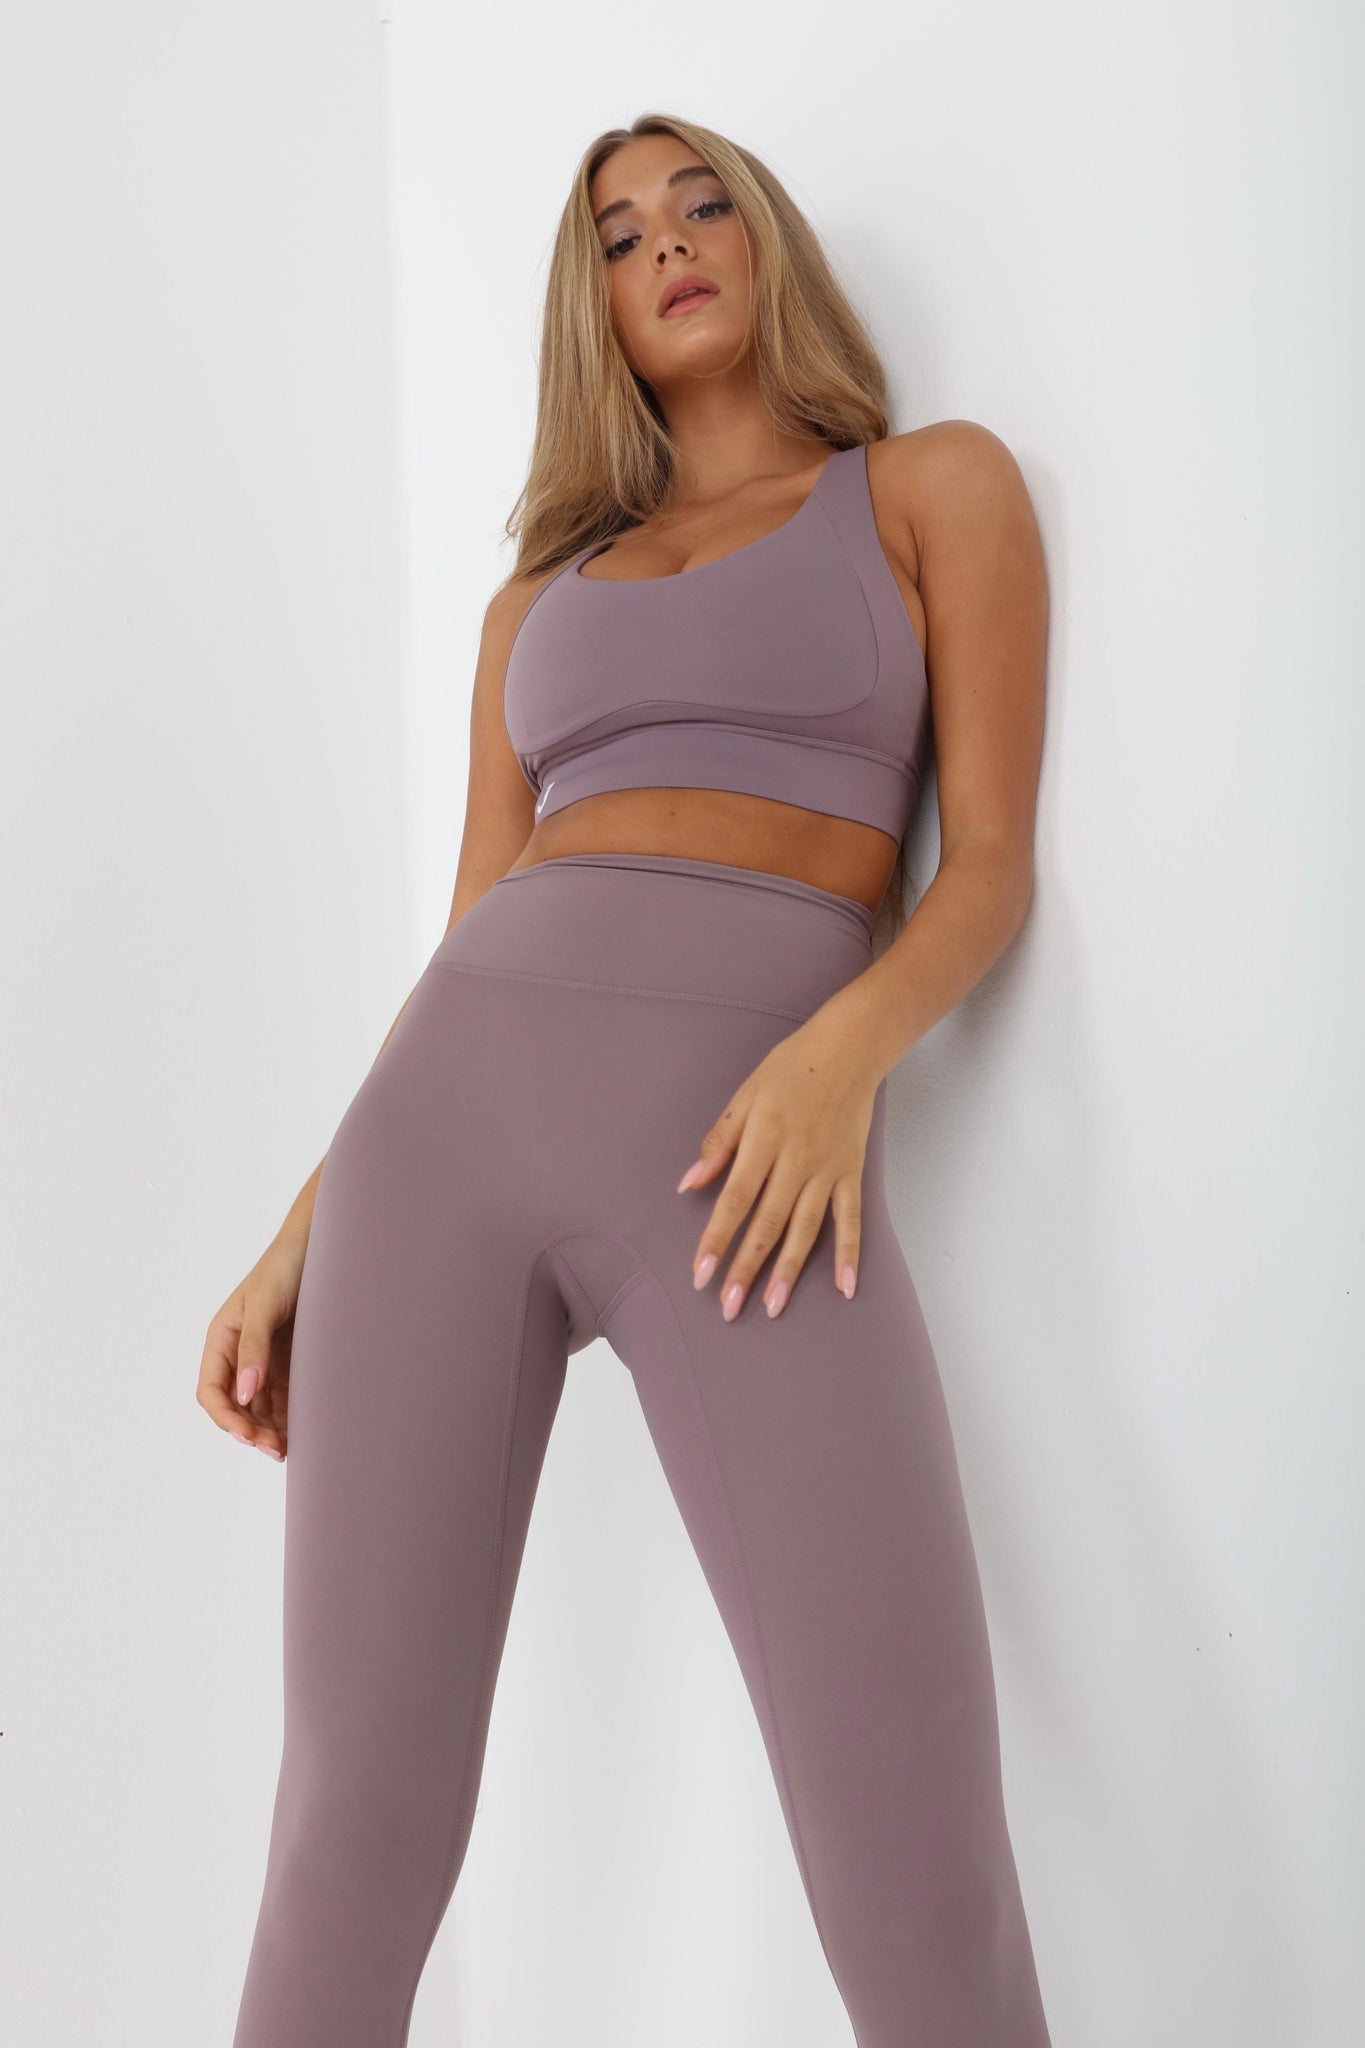 JUV fresh legging in purple color with matching top, front view.